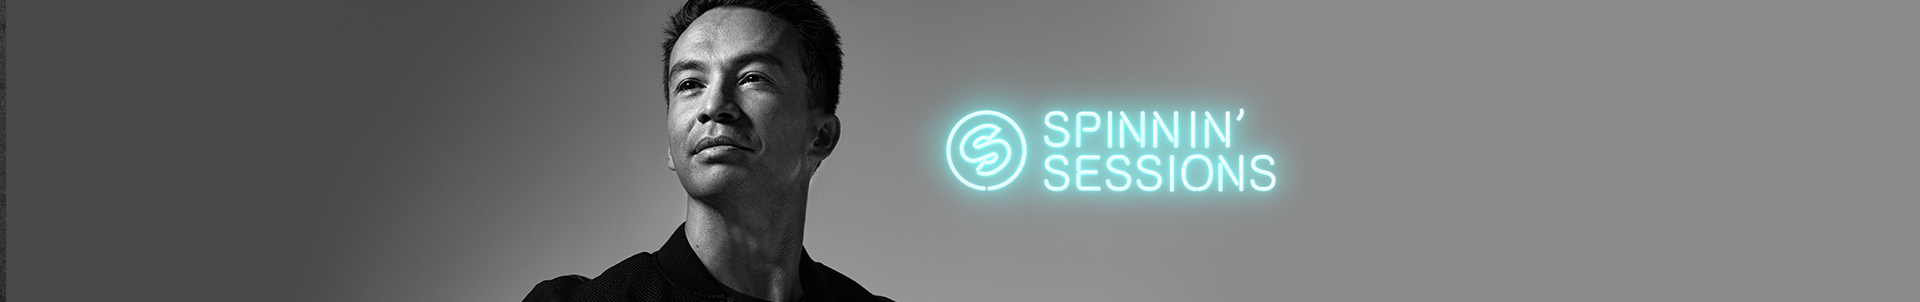 We Rave You premieres Spinnin' Sessions incl. Laidback Luke interview